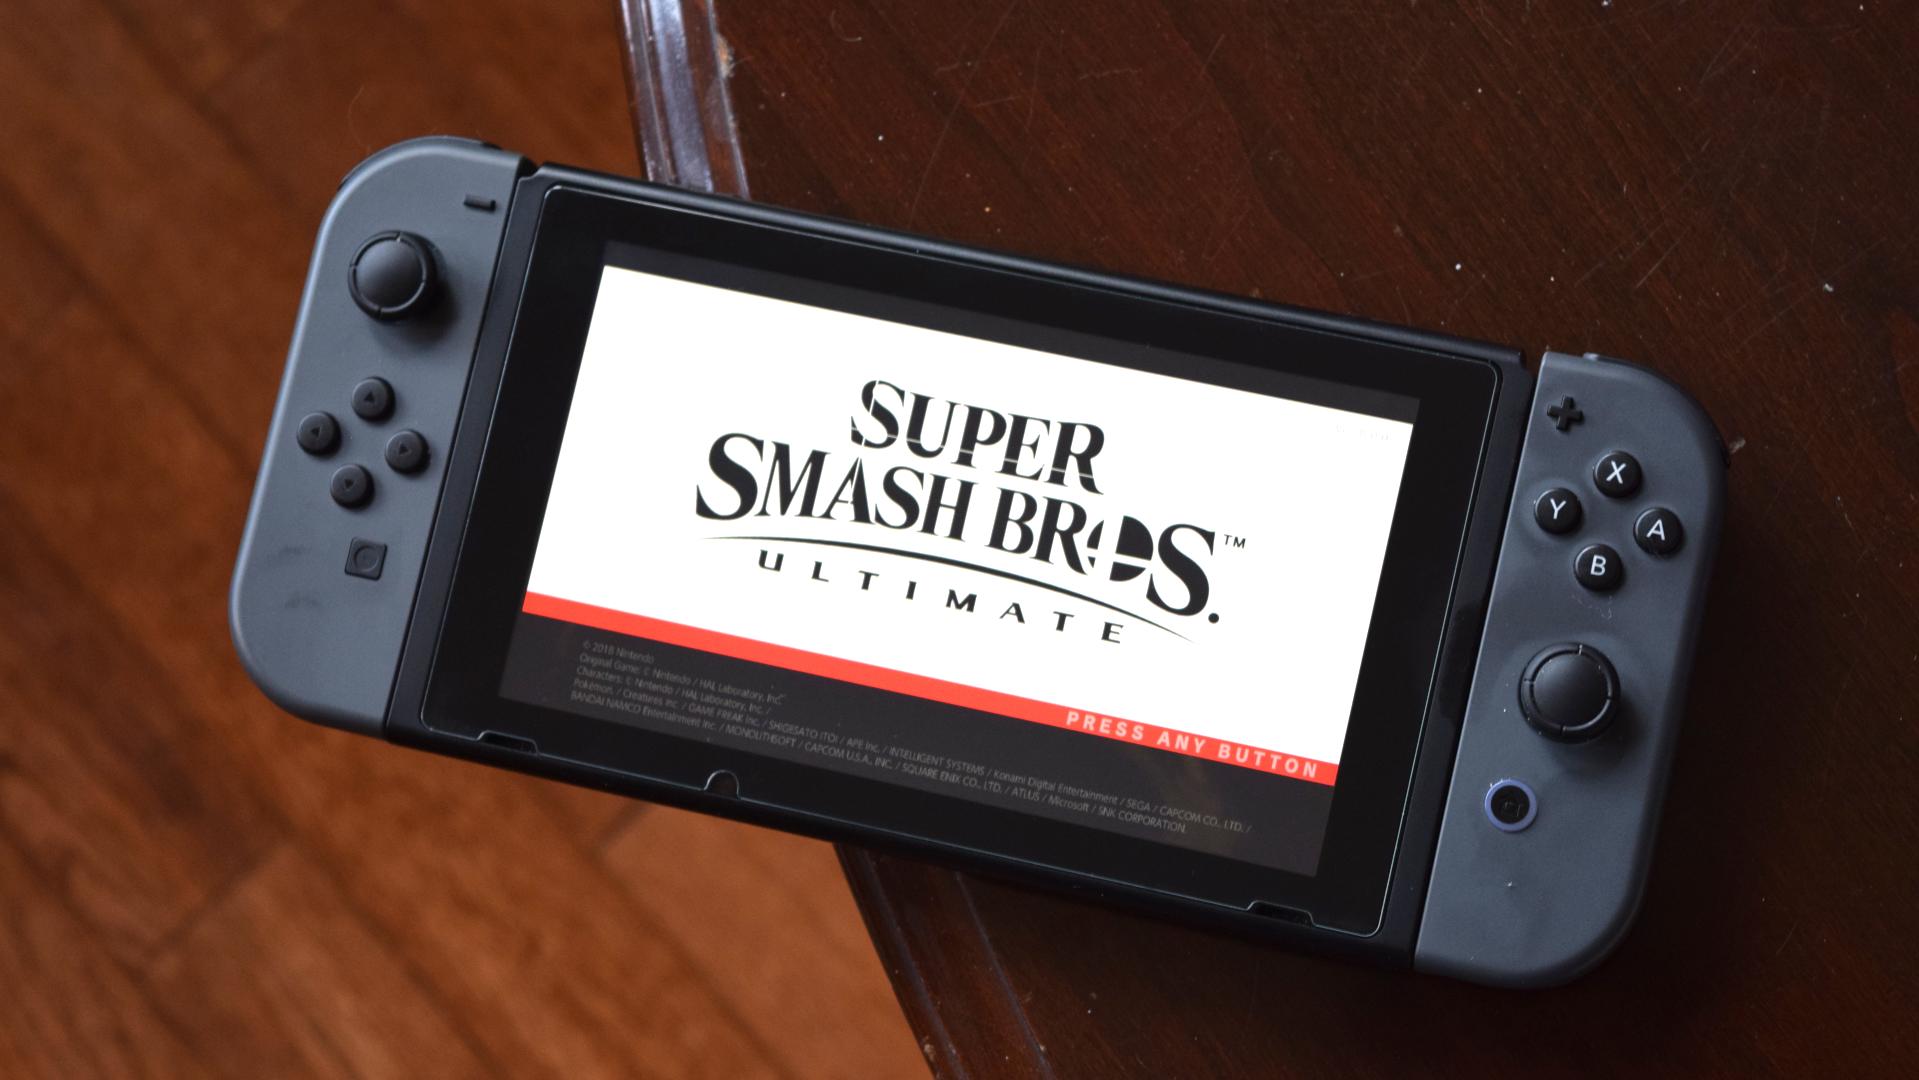 Fighters, Super Smash Bros. Ultimate for the Nintendo Switch System